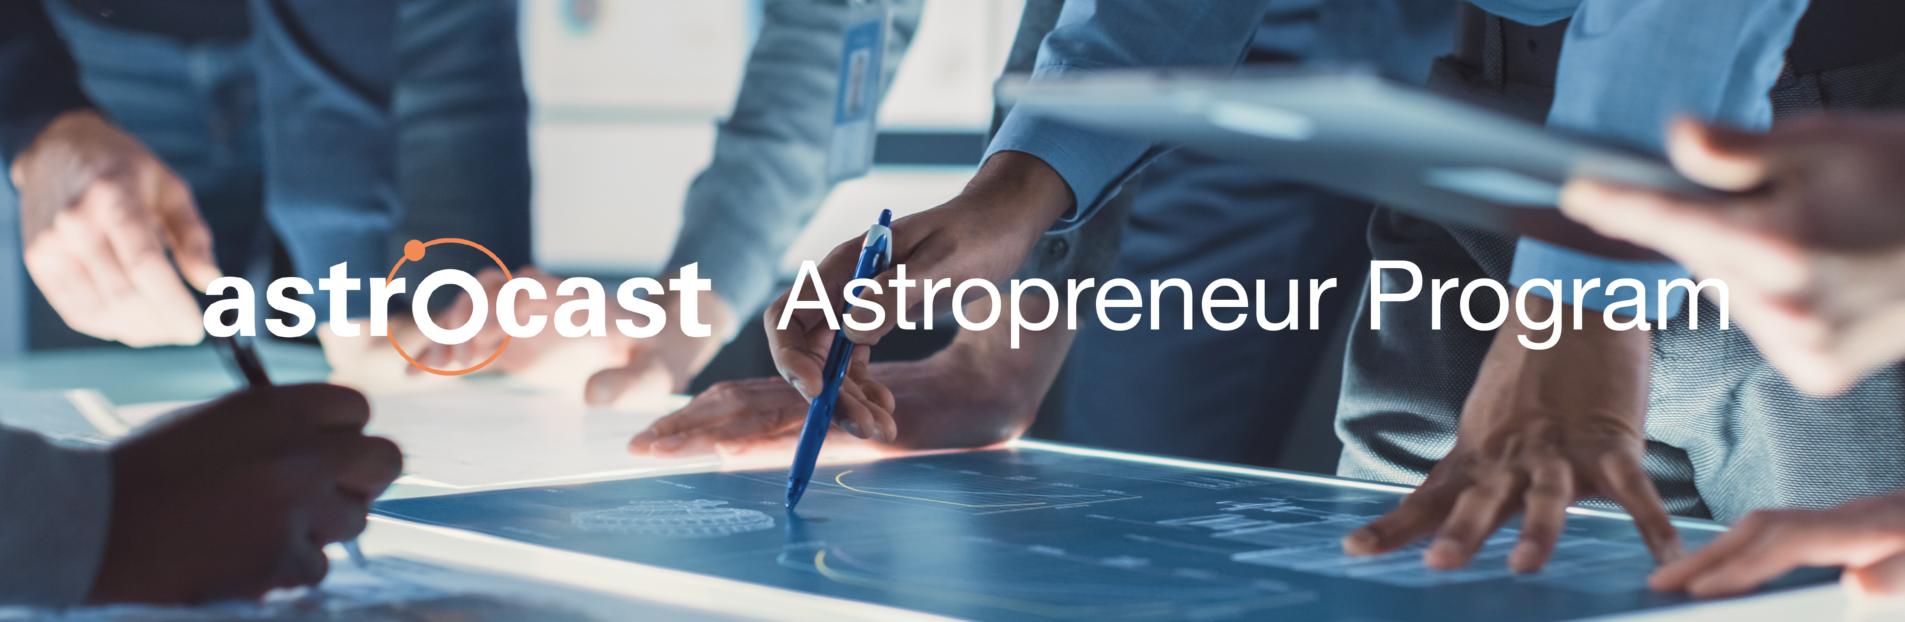 Astrocast Launches New enhancements to its Astropreneur Program to Test Satellite IoT Technology